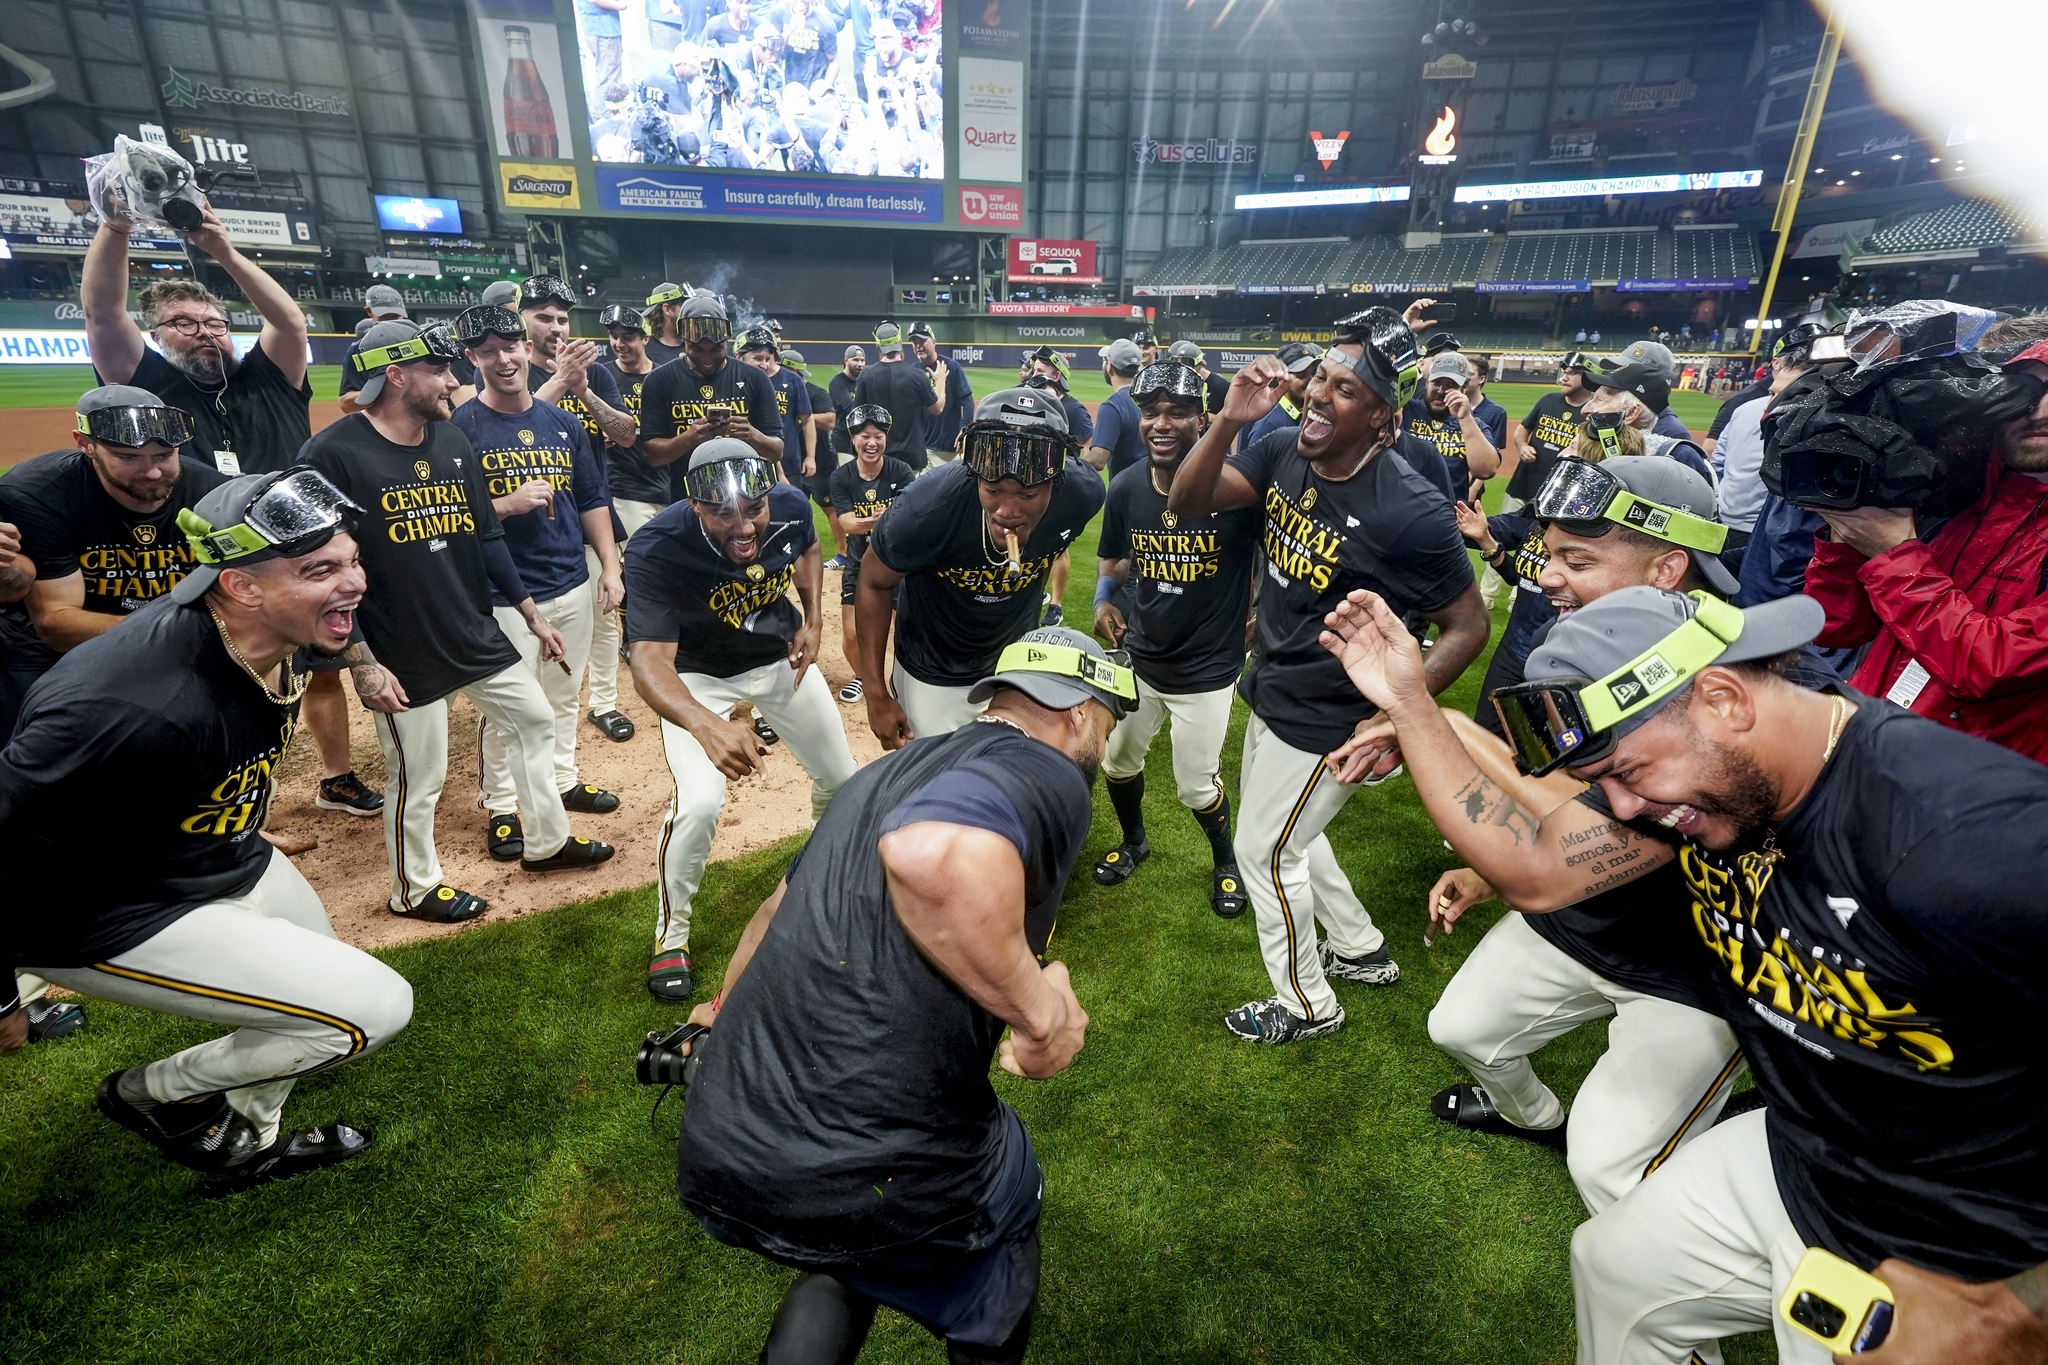 Milwaukee Brewers' players celebrate after clinching the National League Central Division.